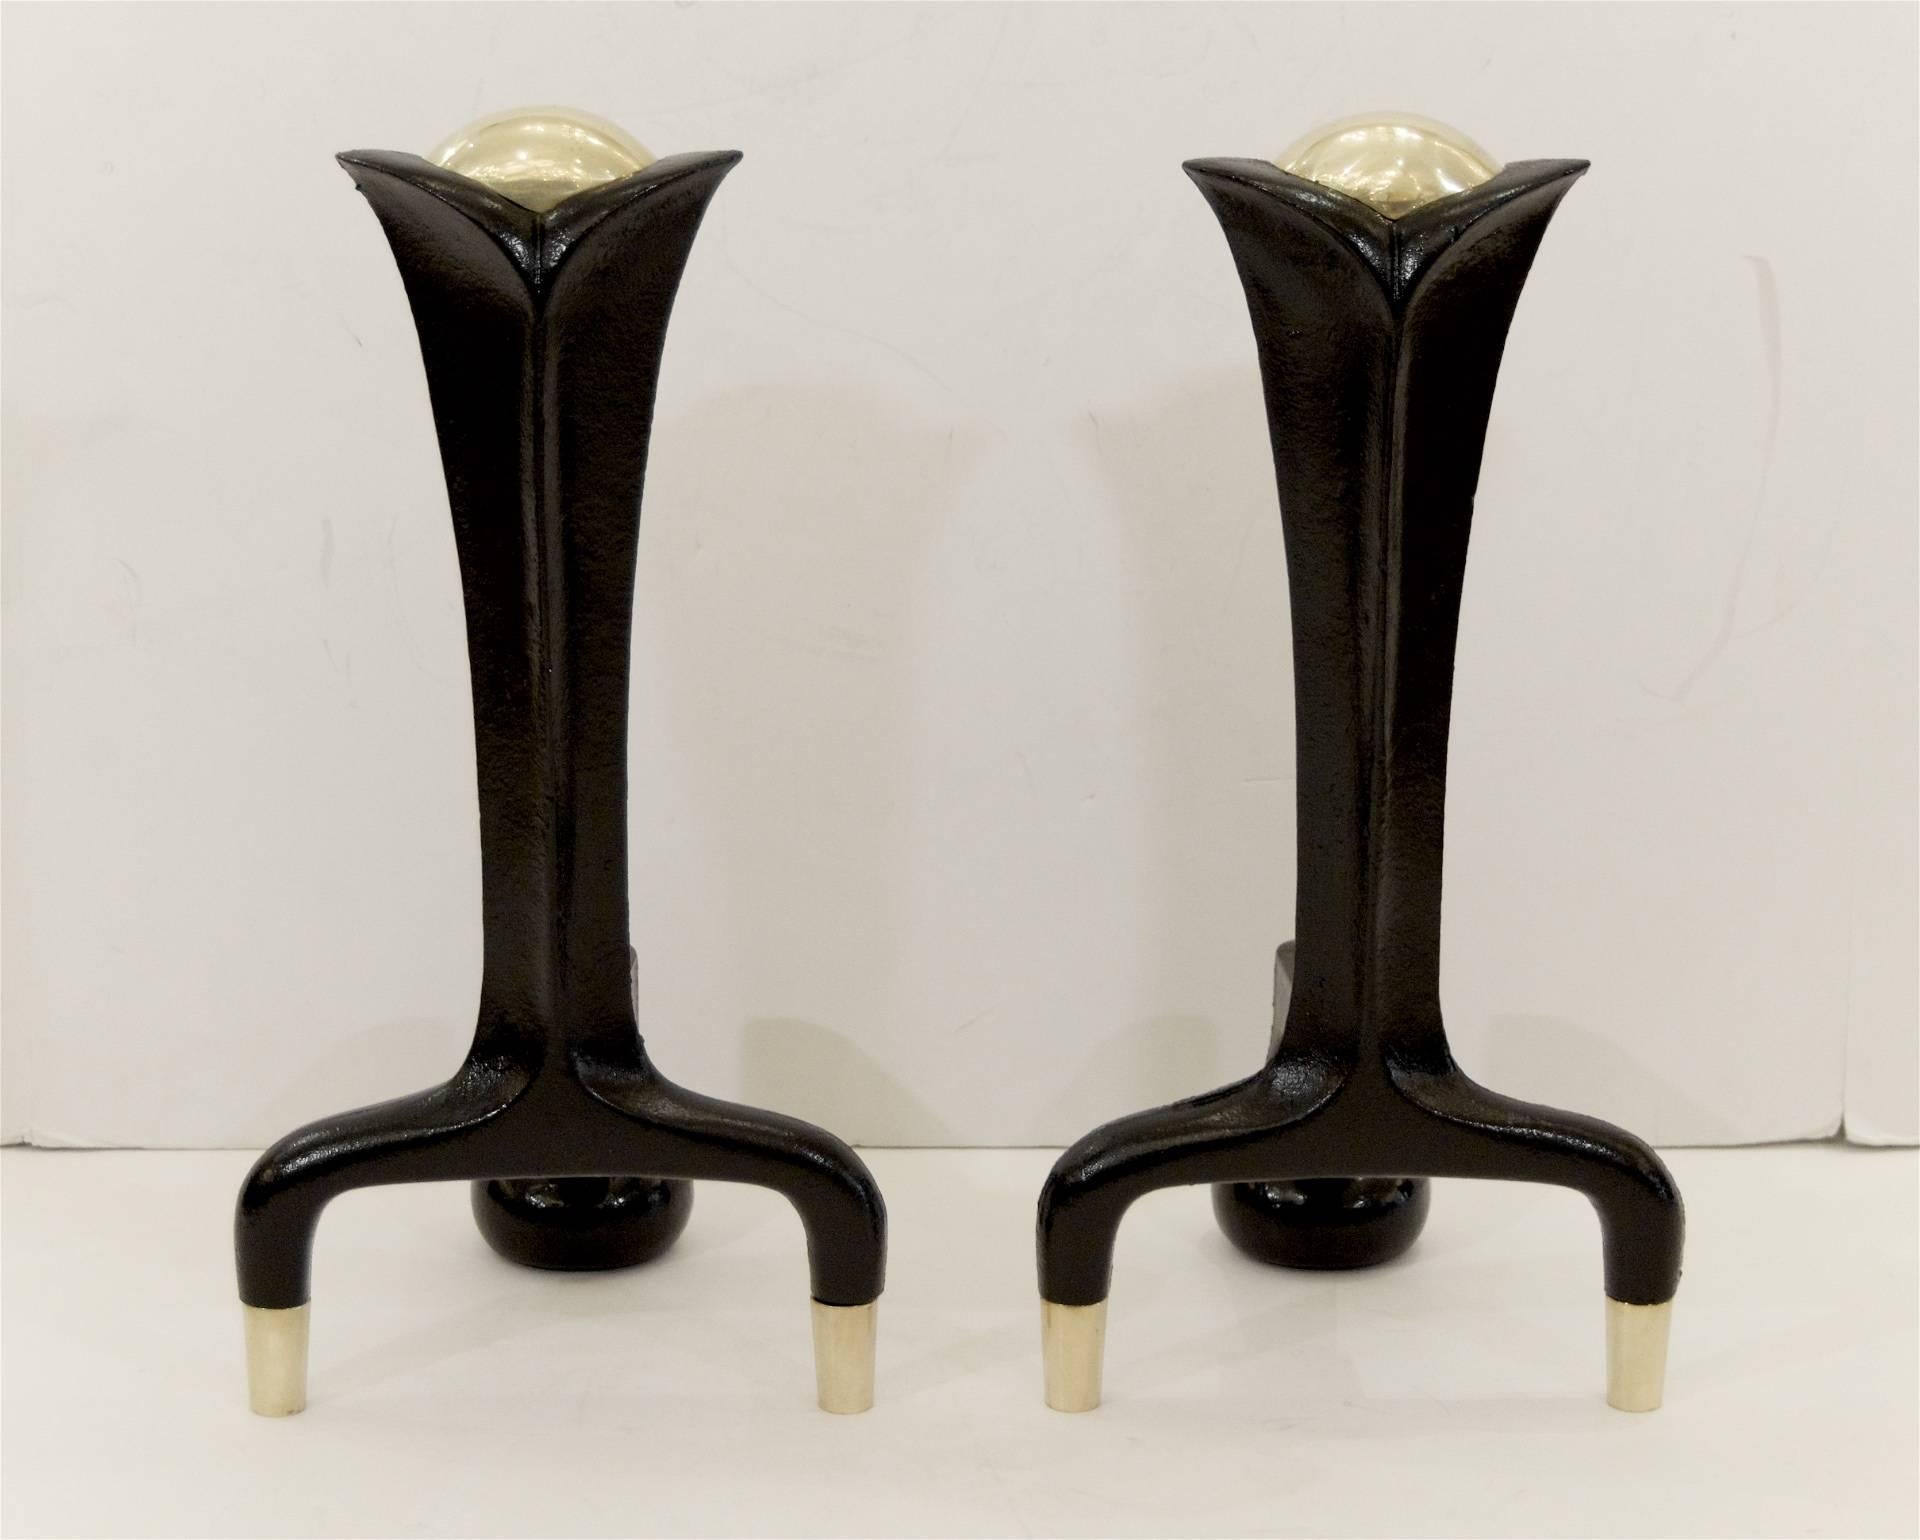 Elegantly formed black enameled iron andirons and high polish brass accents by Donald Deskey.